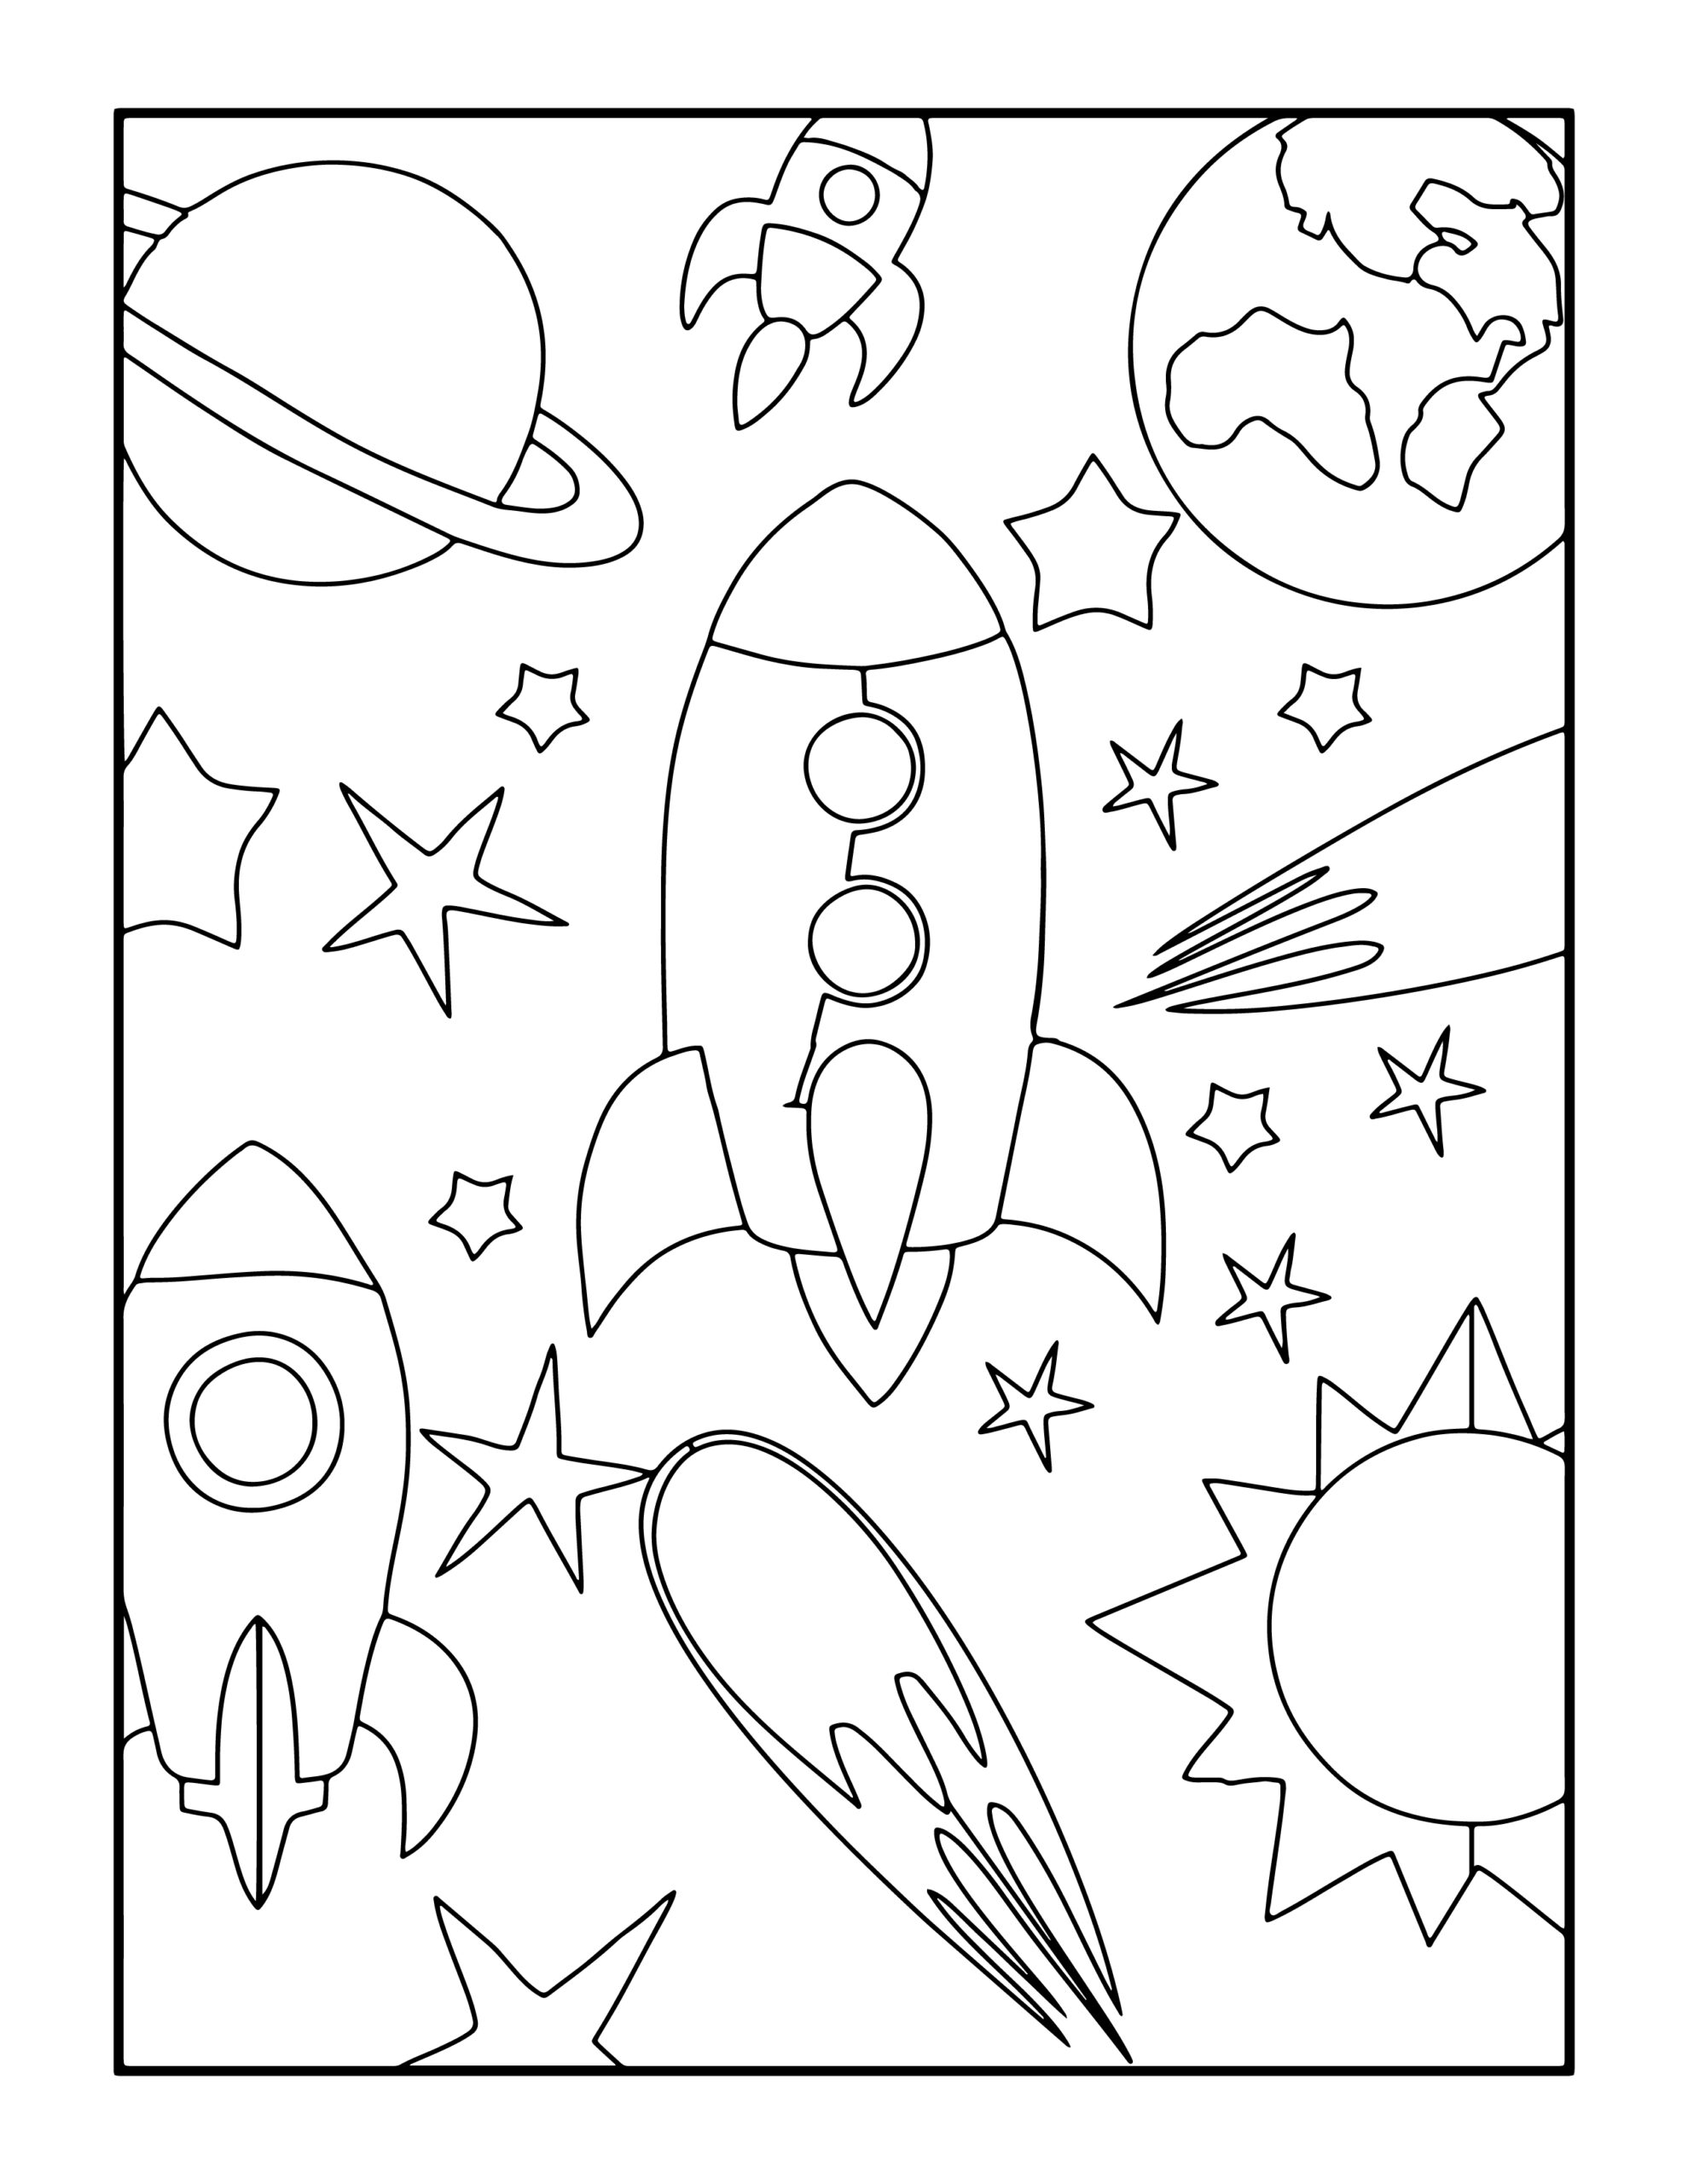 Journey to the stars a space coloring book for kids made by teachers